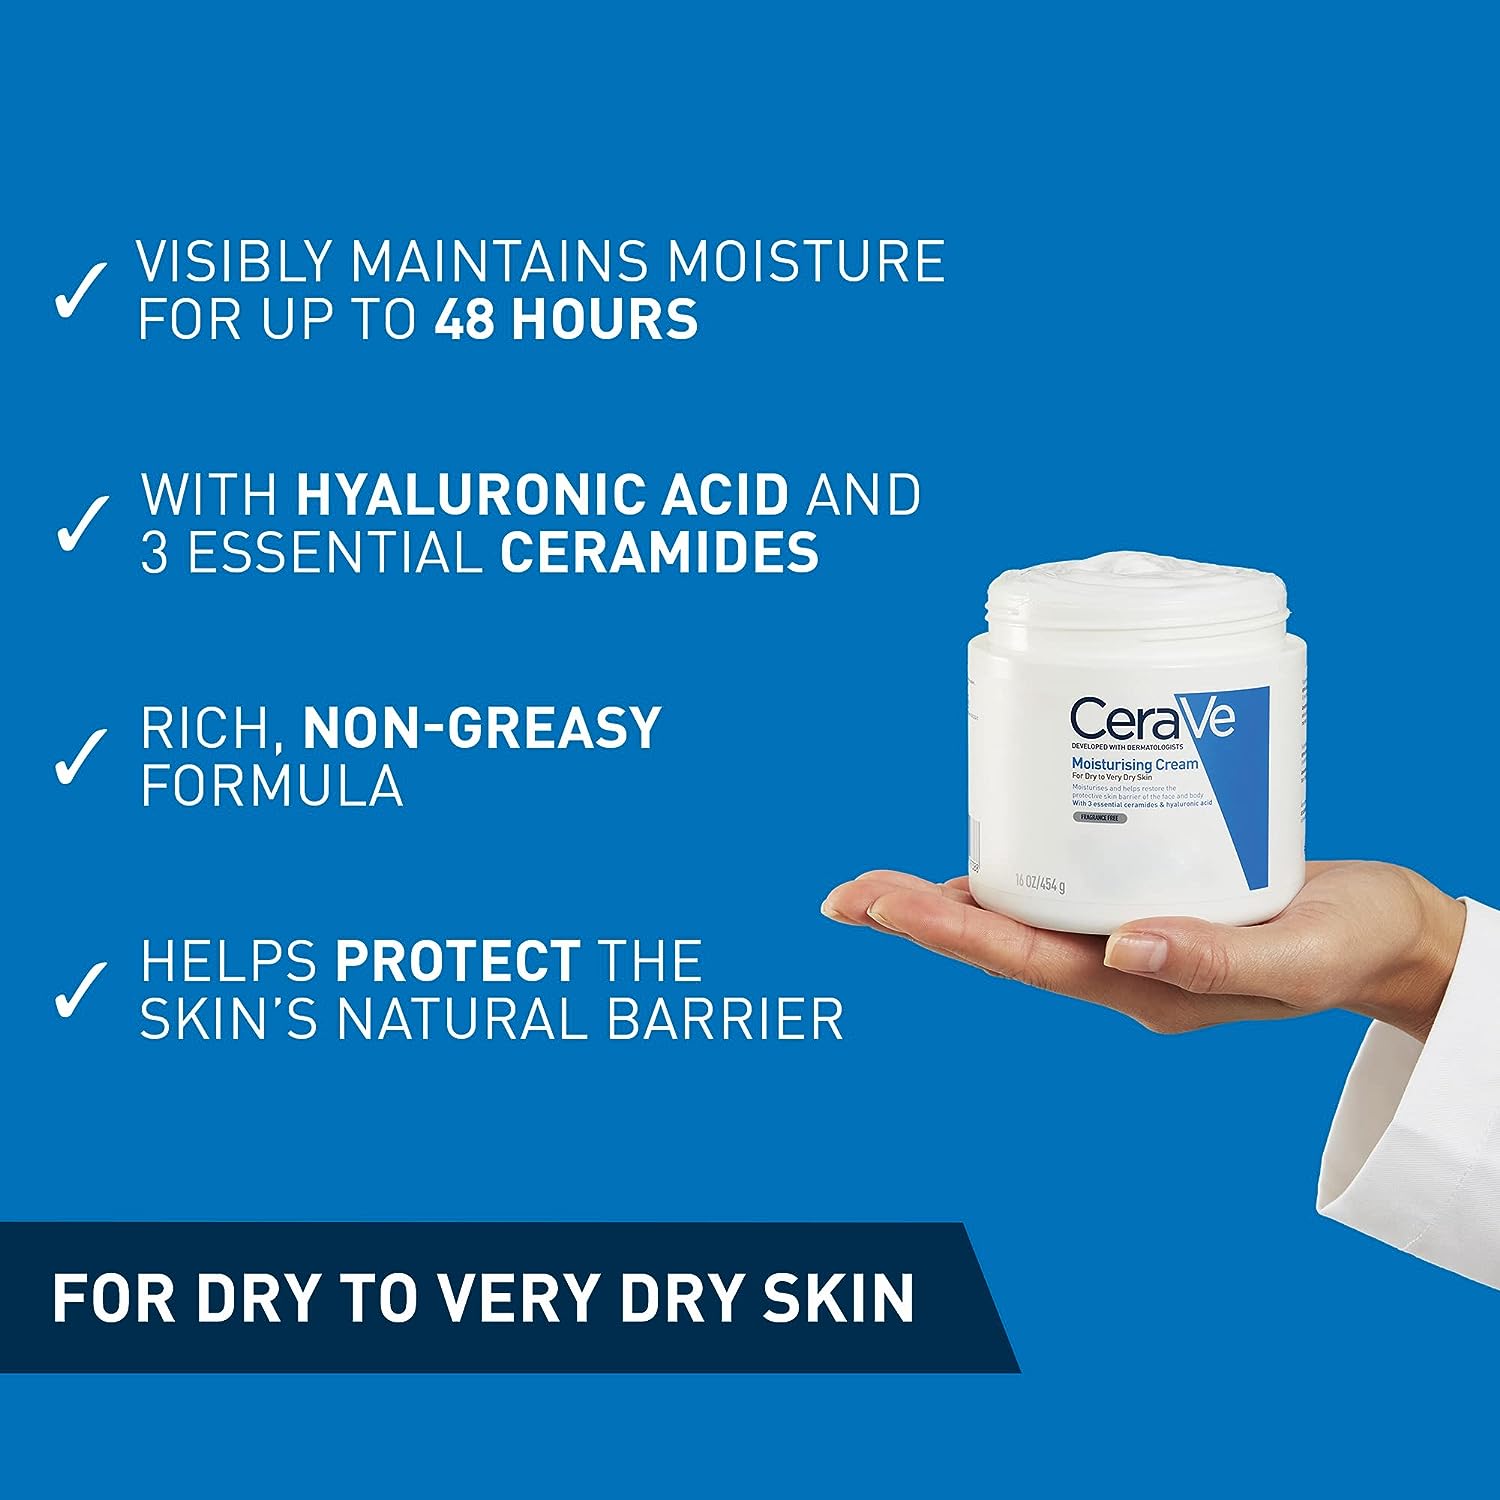 CeraVe Moisturising Cream for Dry to Very Dry Skin with Hyaluronic Acid & 3 Essential Ceramides